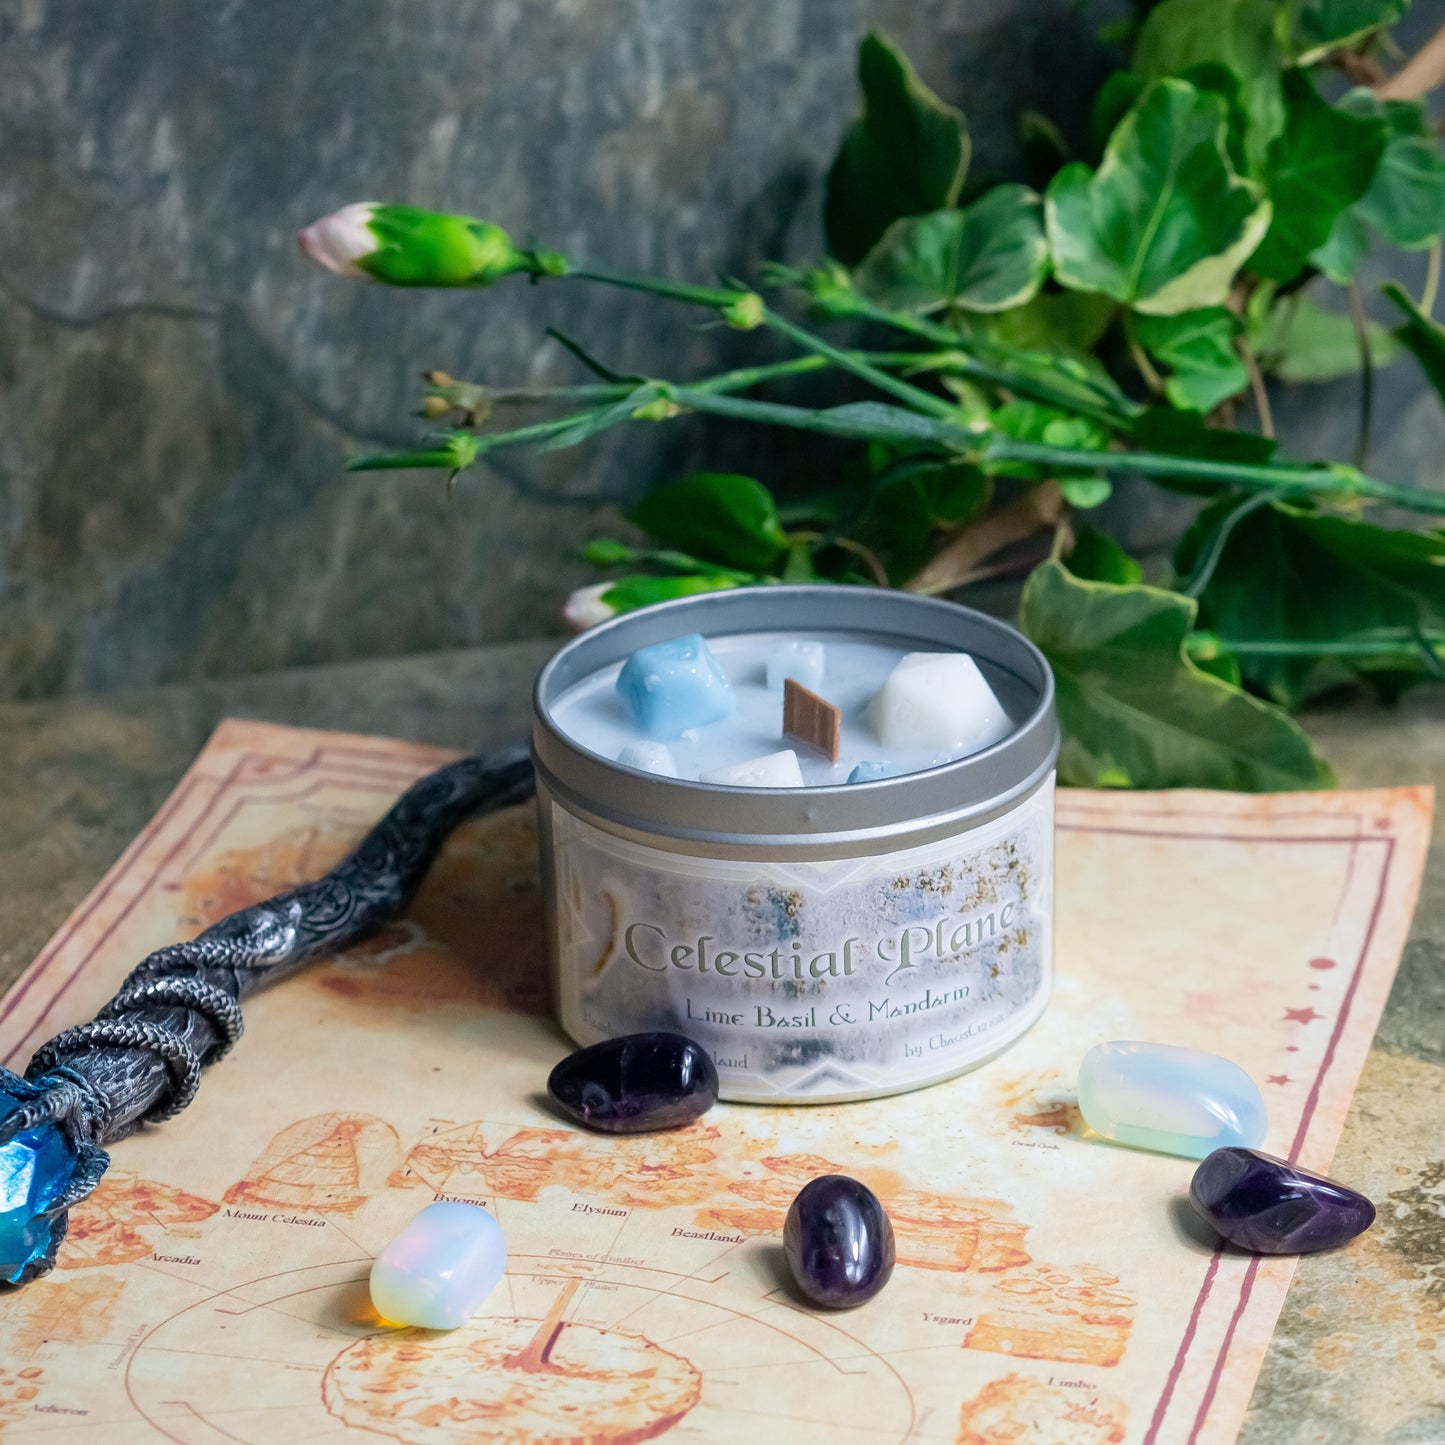 The Celestial Planes, DnD Dice Candle, Wood Wick Candle, Lime Basil and Mandarin Scent, Roleplay Candle, with Dice Wax Melts, 35+ Hours